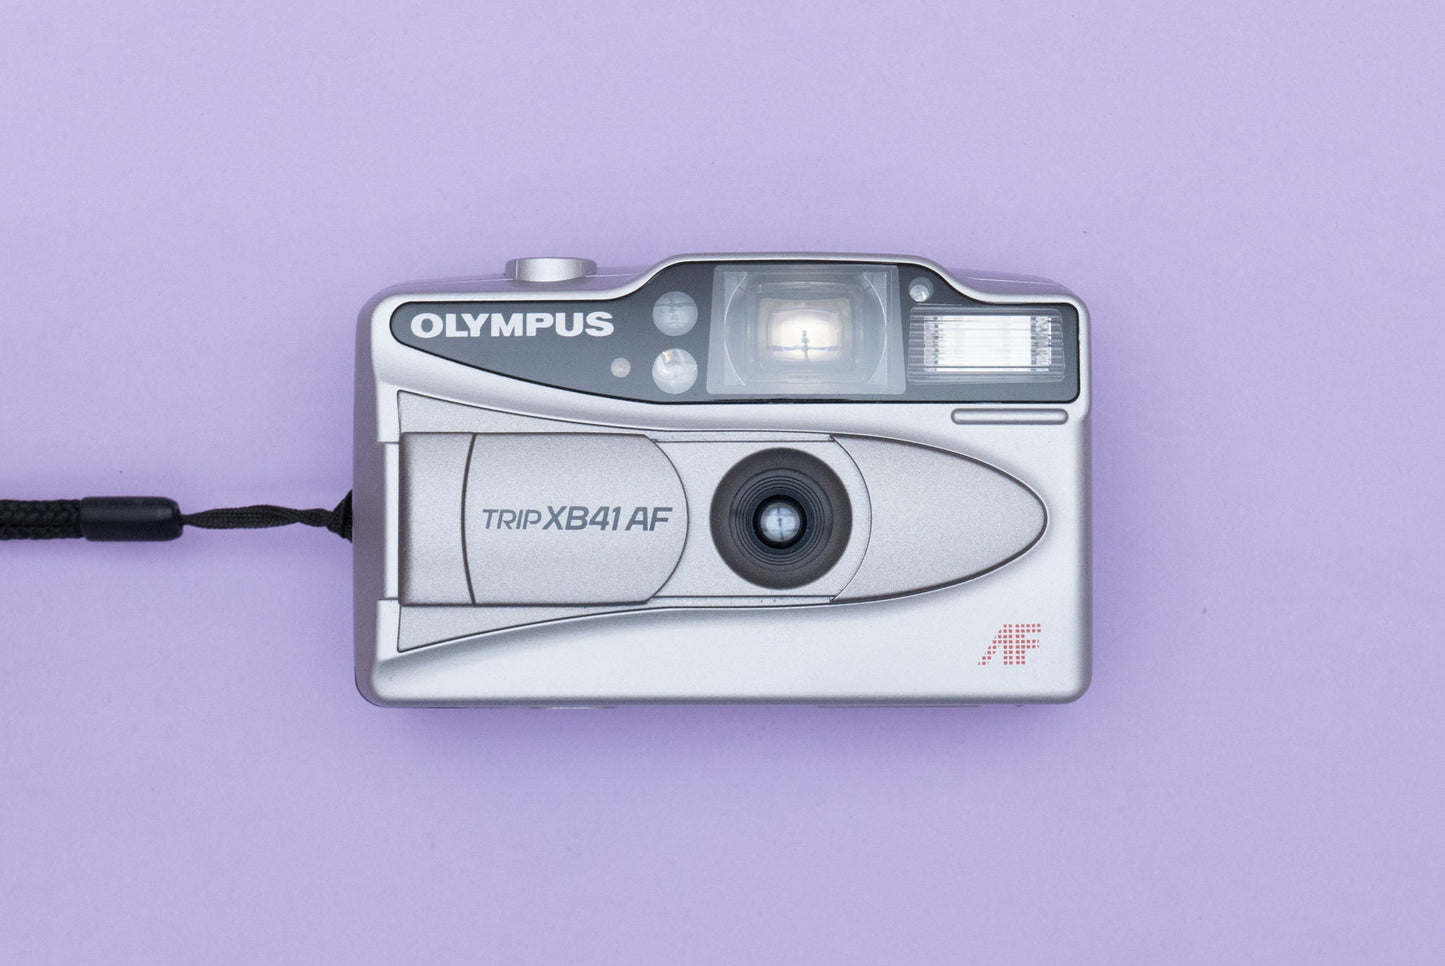 Olympus Trip XB 41 AF Compact 35mm Point and Shoot Film Camera